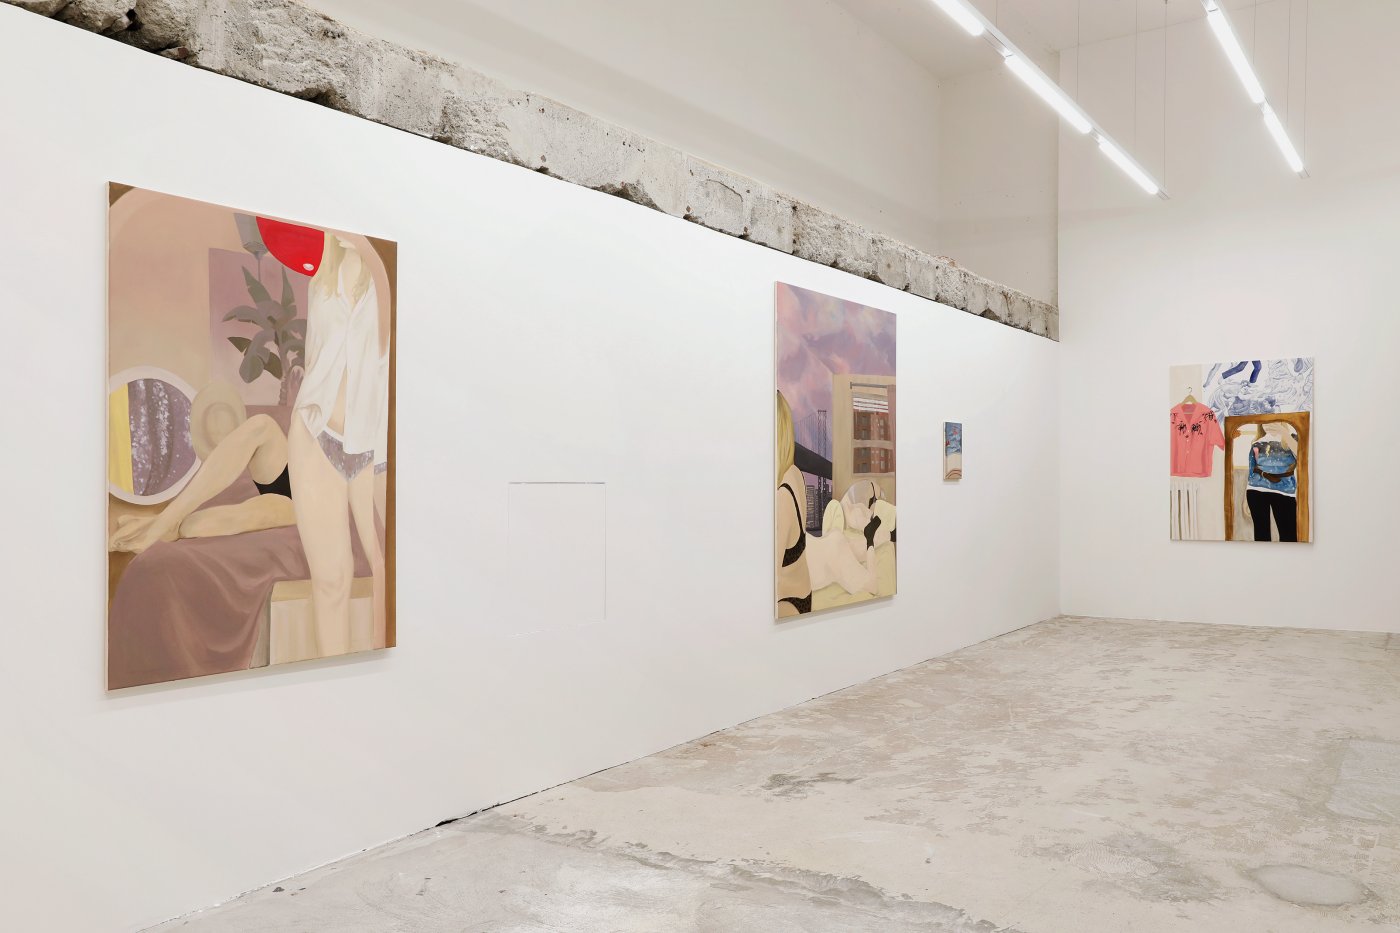 Installation image for Romane De Watteville: Every Me, at Fabienne Levy